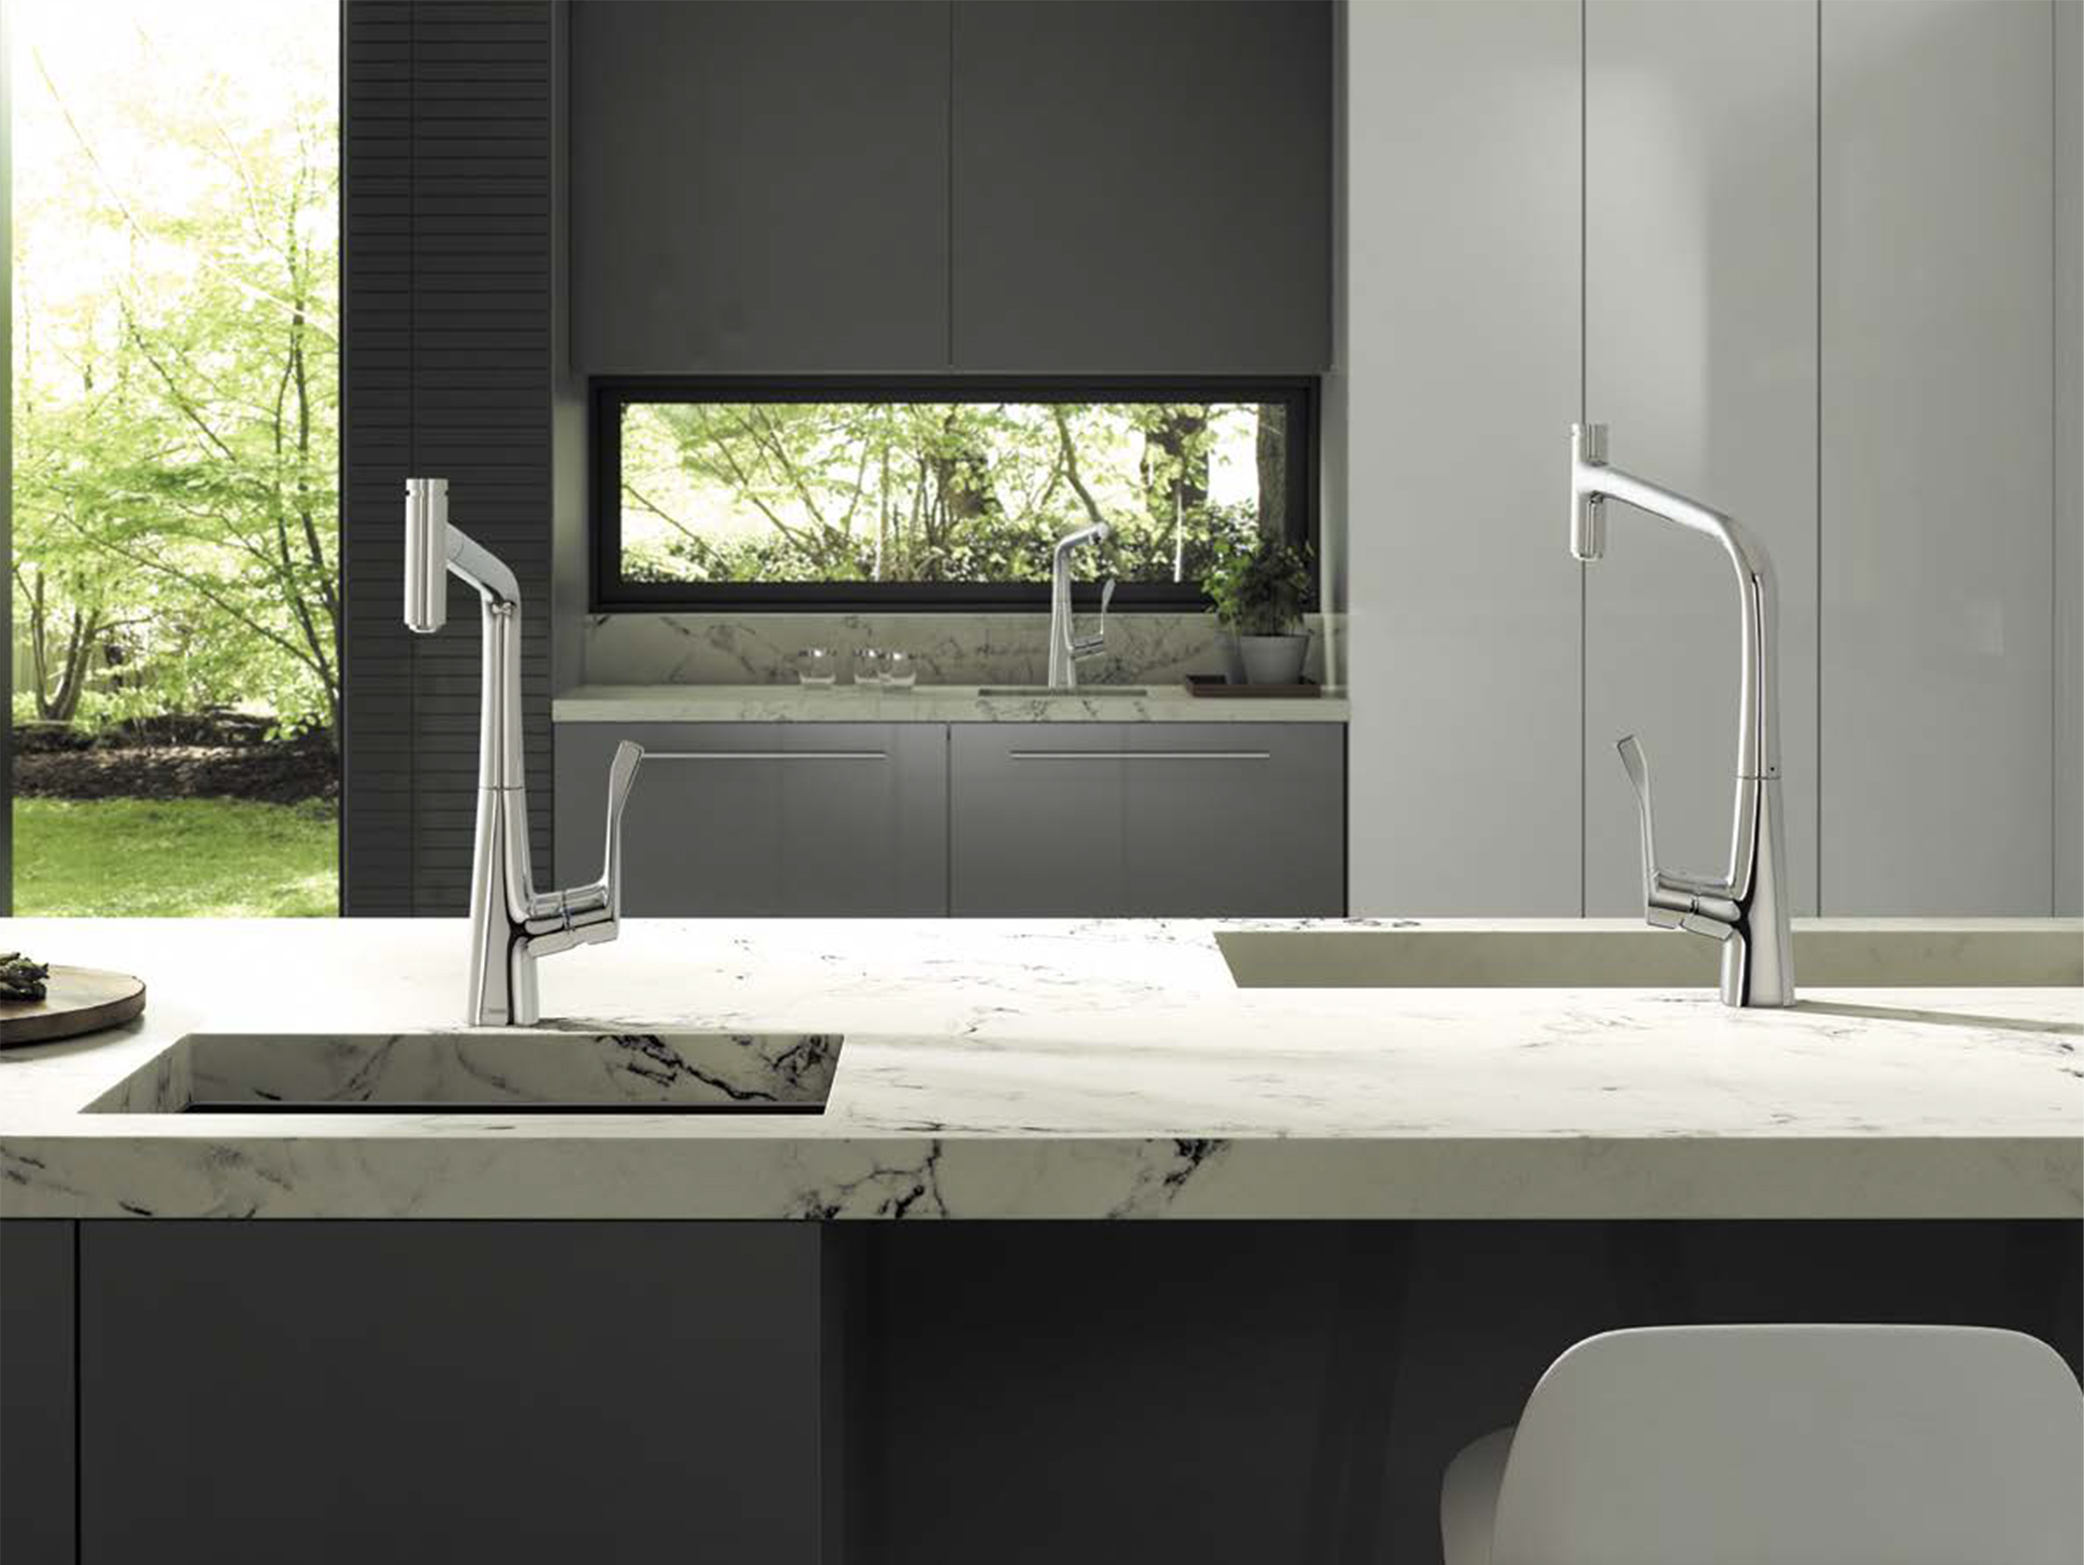 Hansgrohe kitchen faucet